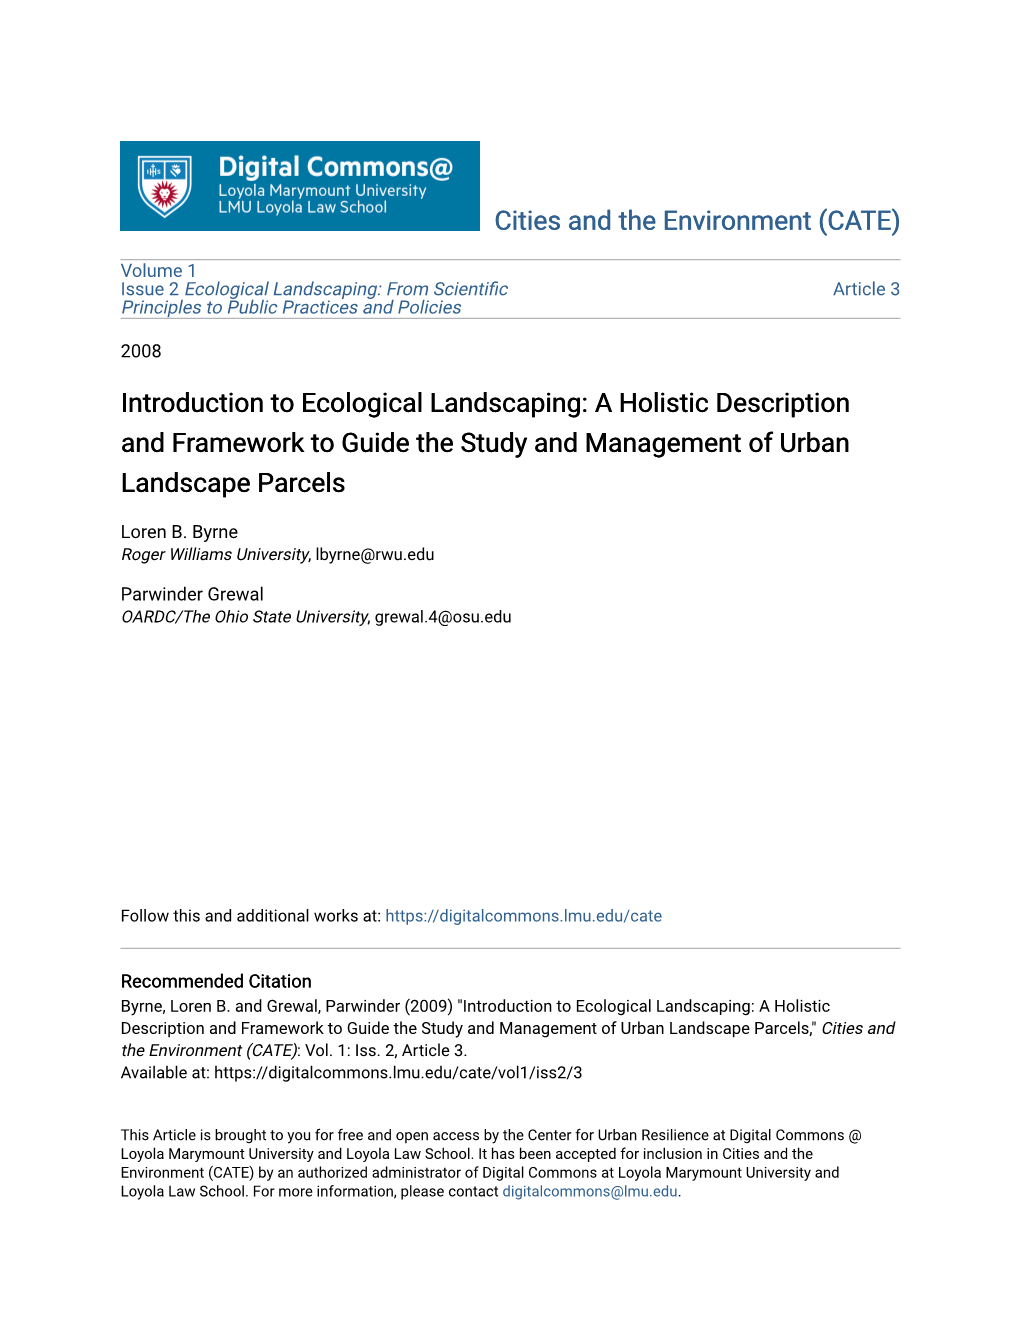 Introduction to Ecological Landscaping: a Holistic Description and Framework to Guide the Study and Management of Urban Landscape Parcels